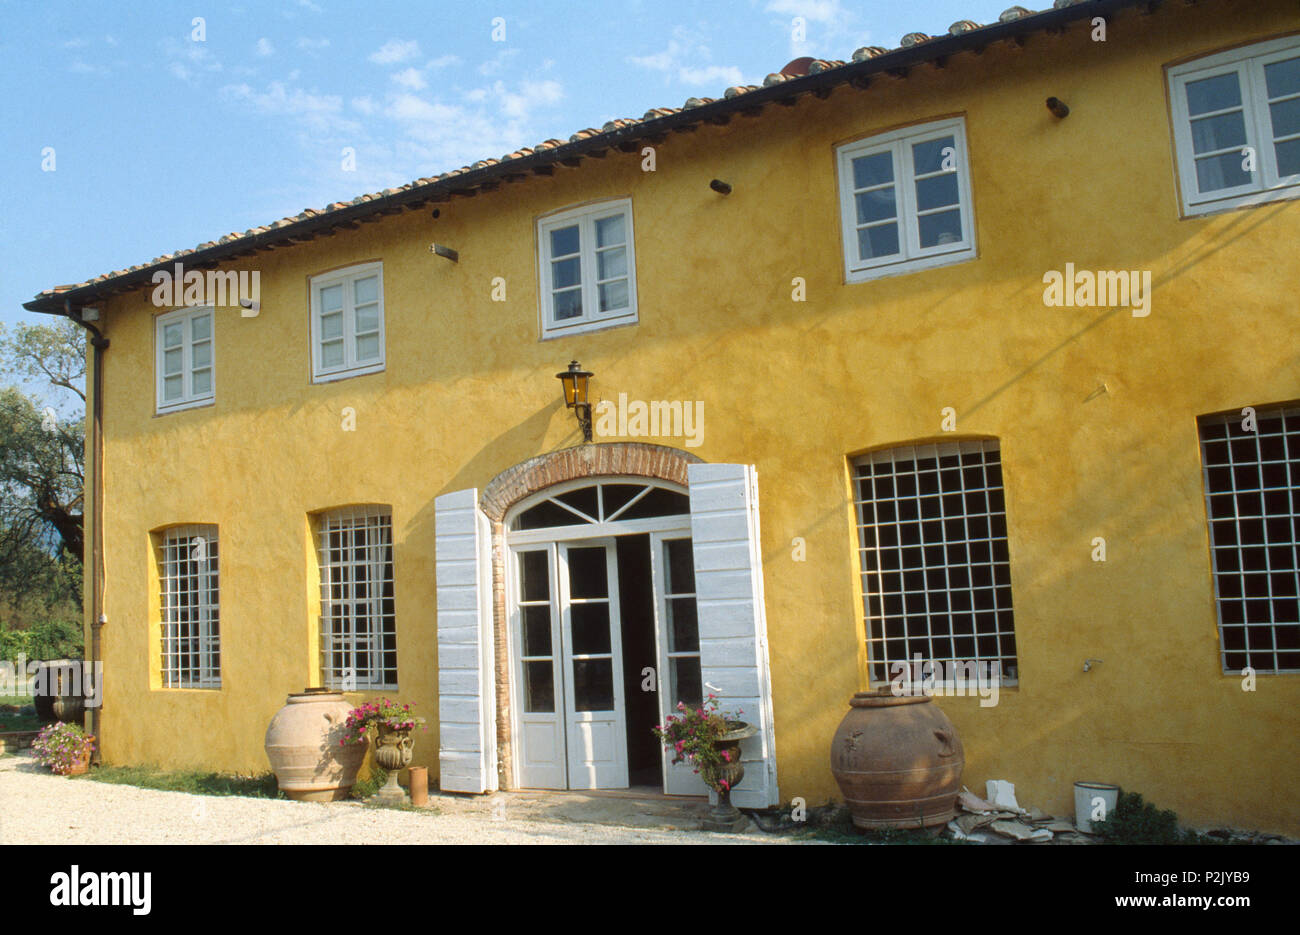 Exterior of yellow painted Tuscan villa with white shutters on half-glazed  double doors Stock Photo - Alamy